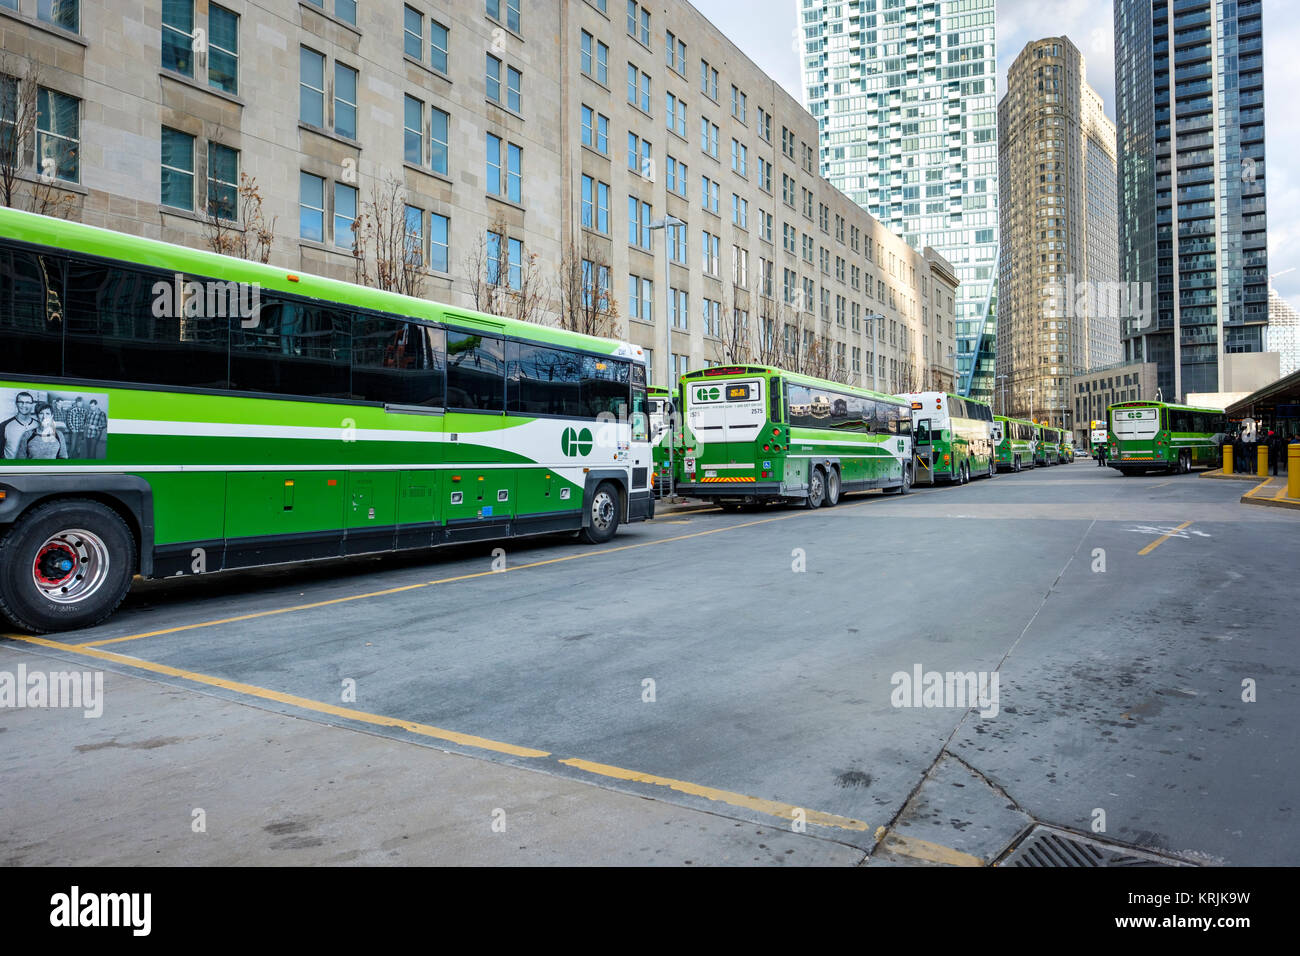 Union Station Bus Terminal, go buses used for public transportation of commuters living in the GTA region, downtown Toronto, Ontario, Canada. Stock Photo